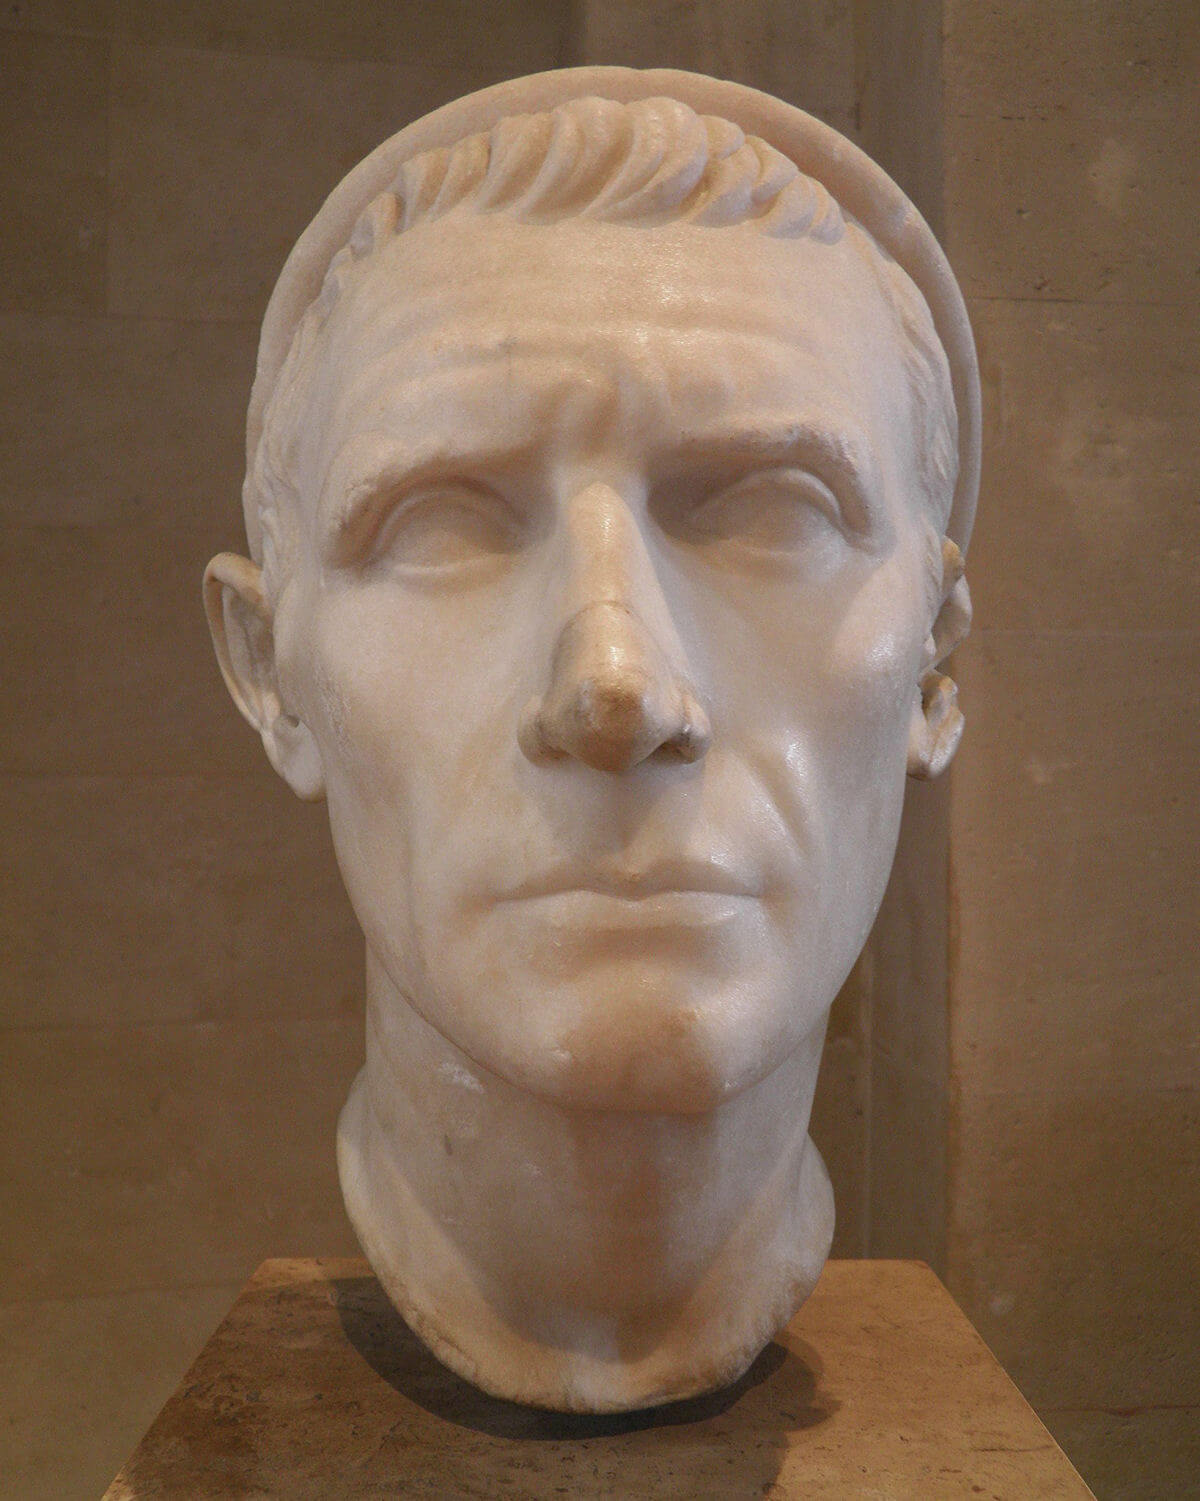 A bust from the Louvre, possibly a Roman copy of a Hellenistic portrait of Antiochus III